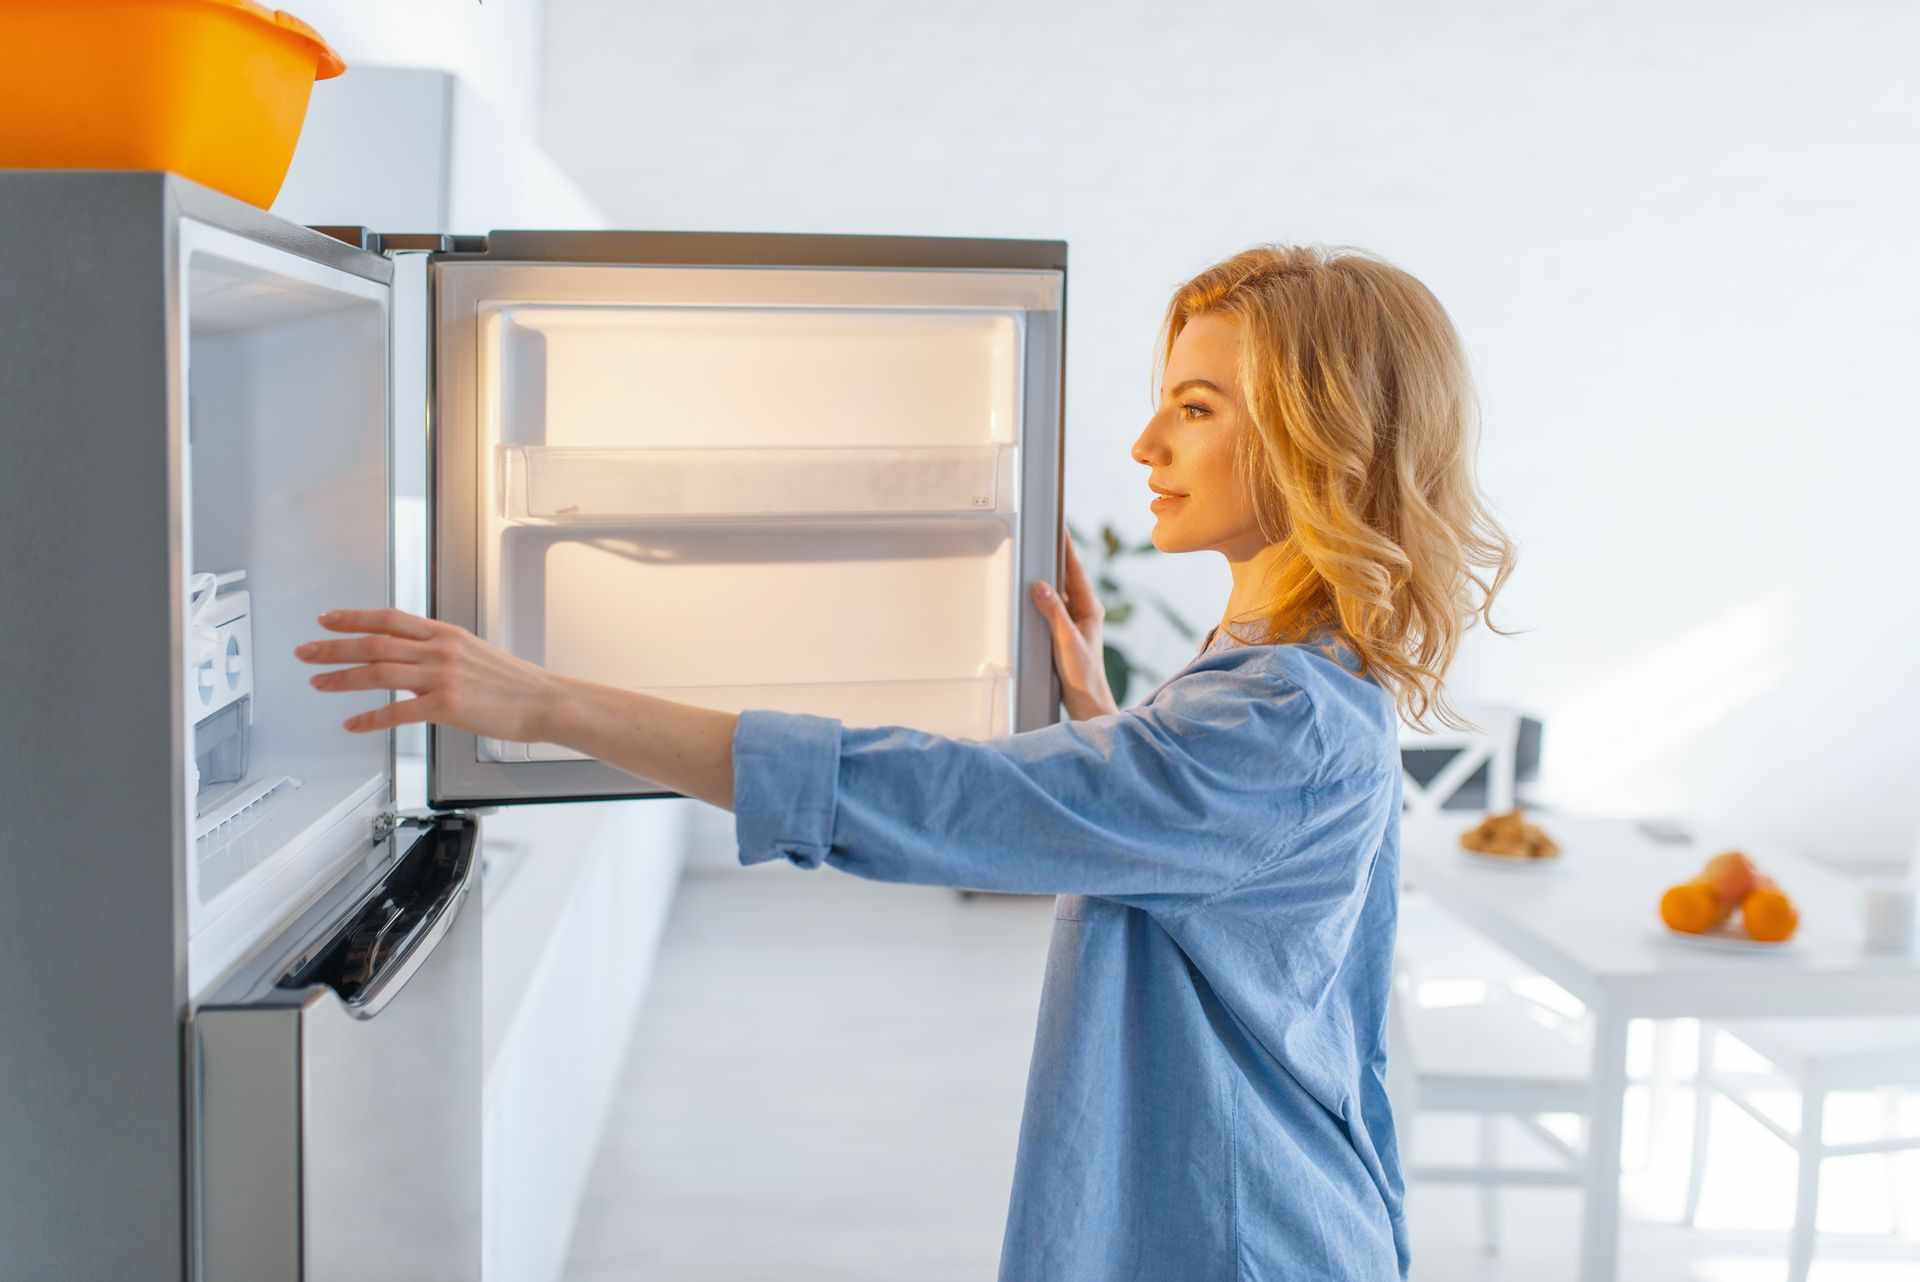 Things To Consider Before Buying A Refrigerator (Buyer's Guide)